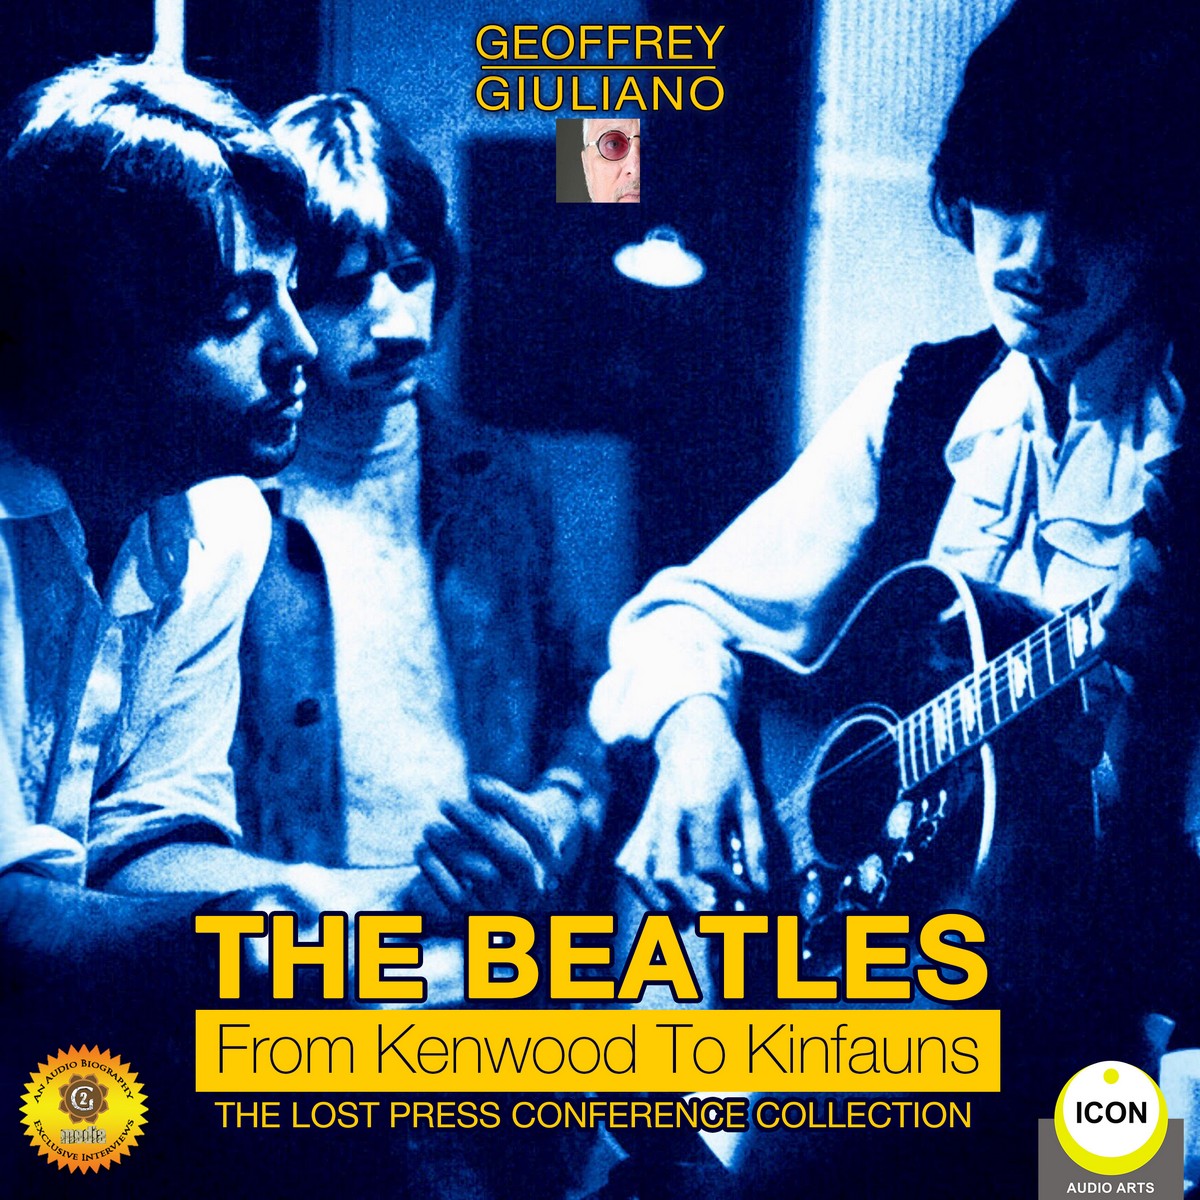 The Beatles from Kenwood to Kinfauns – The Lost Press Conference Collection